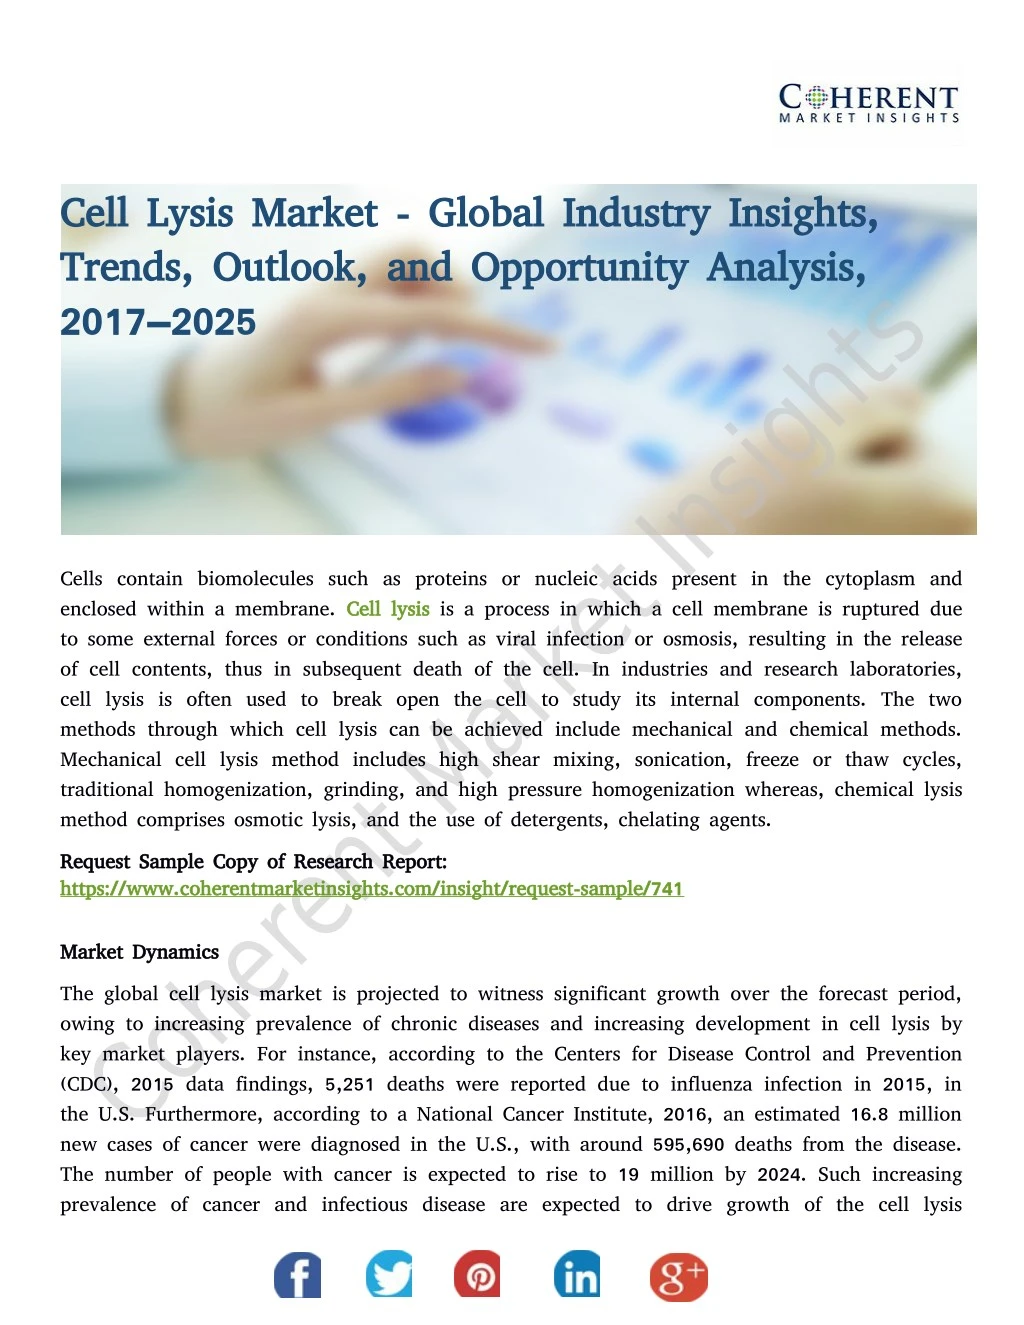 cell lysis market global industry insights cell